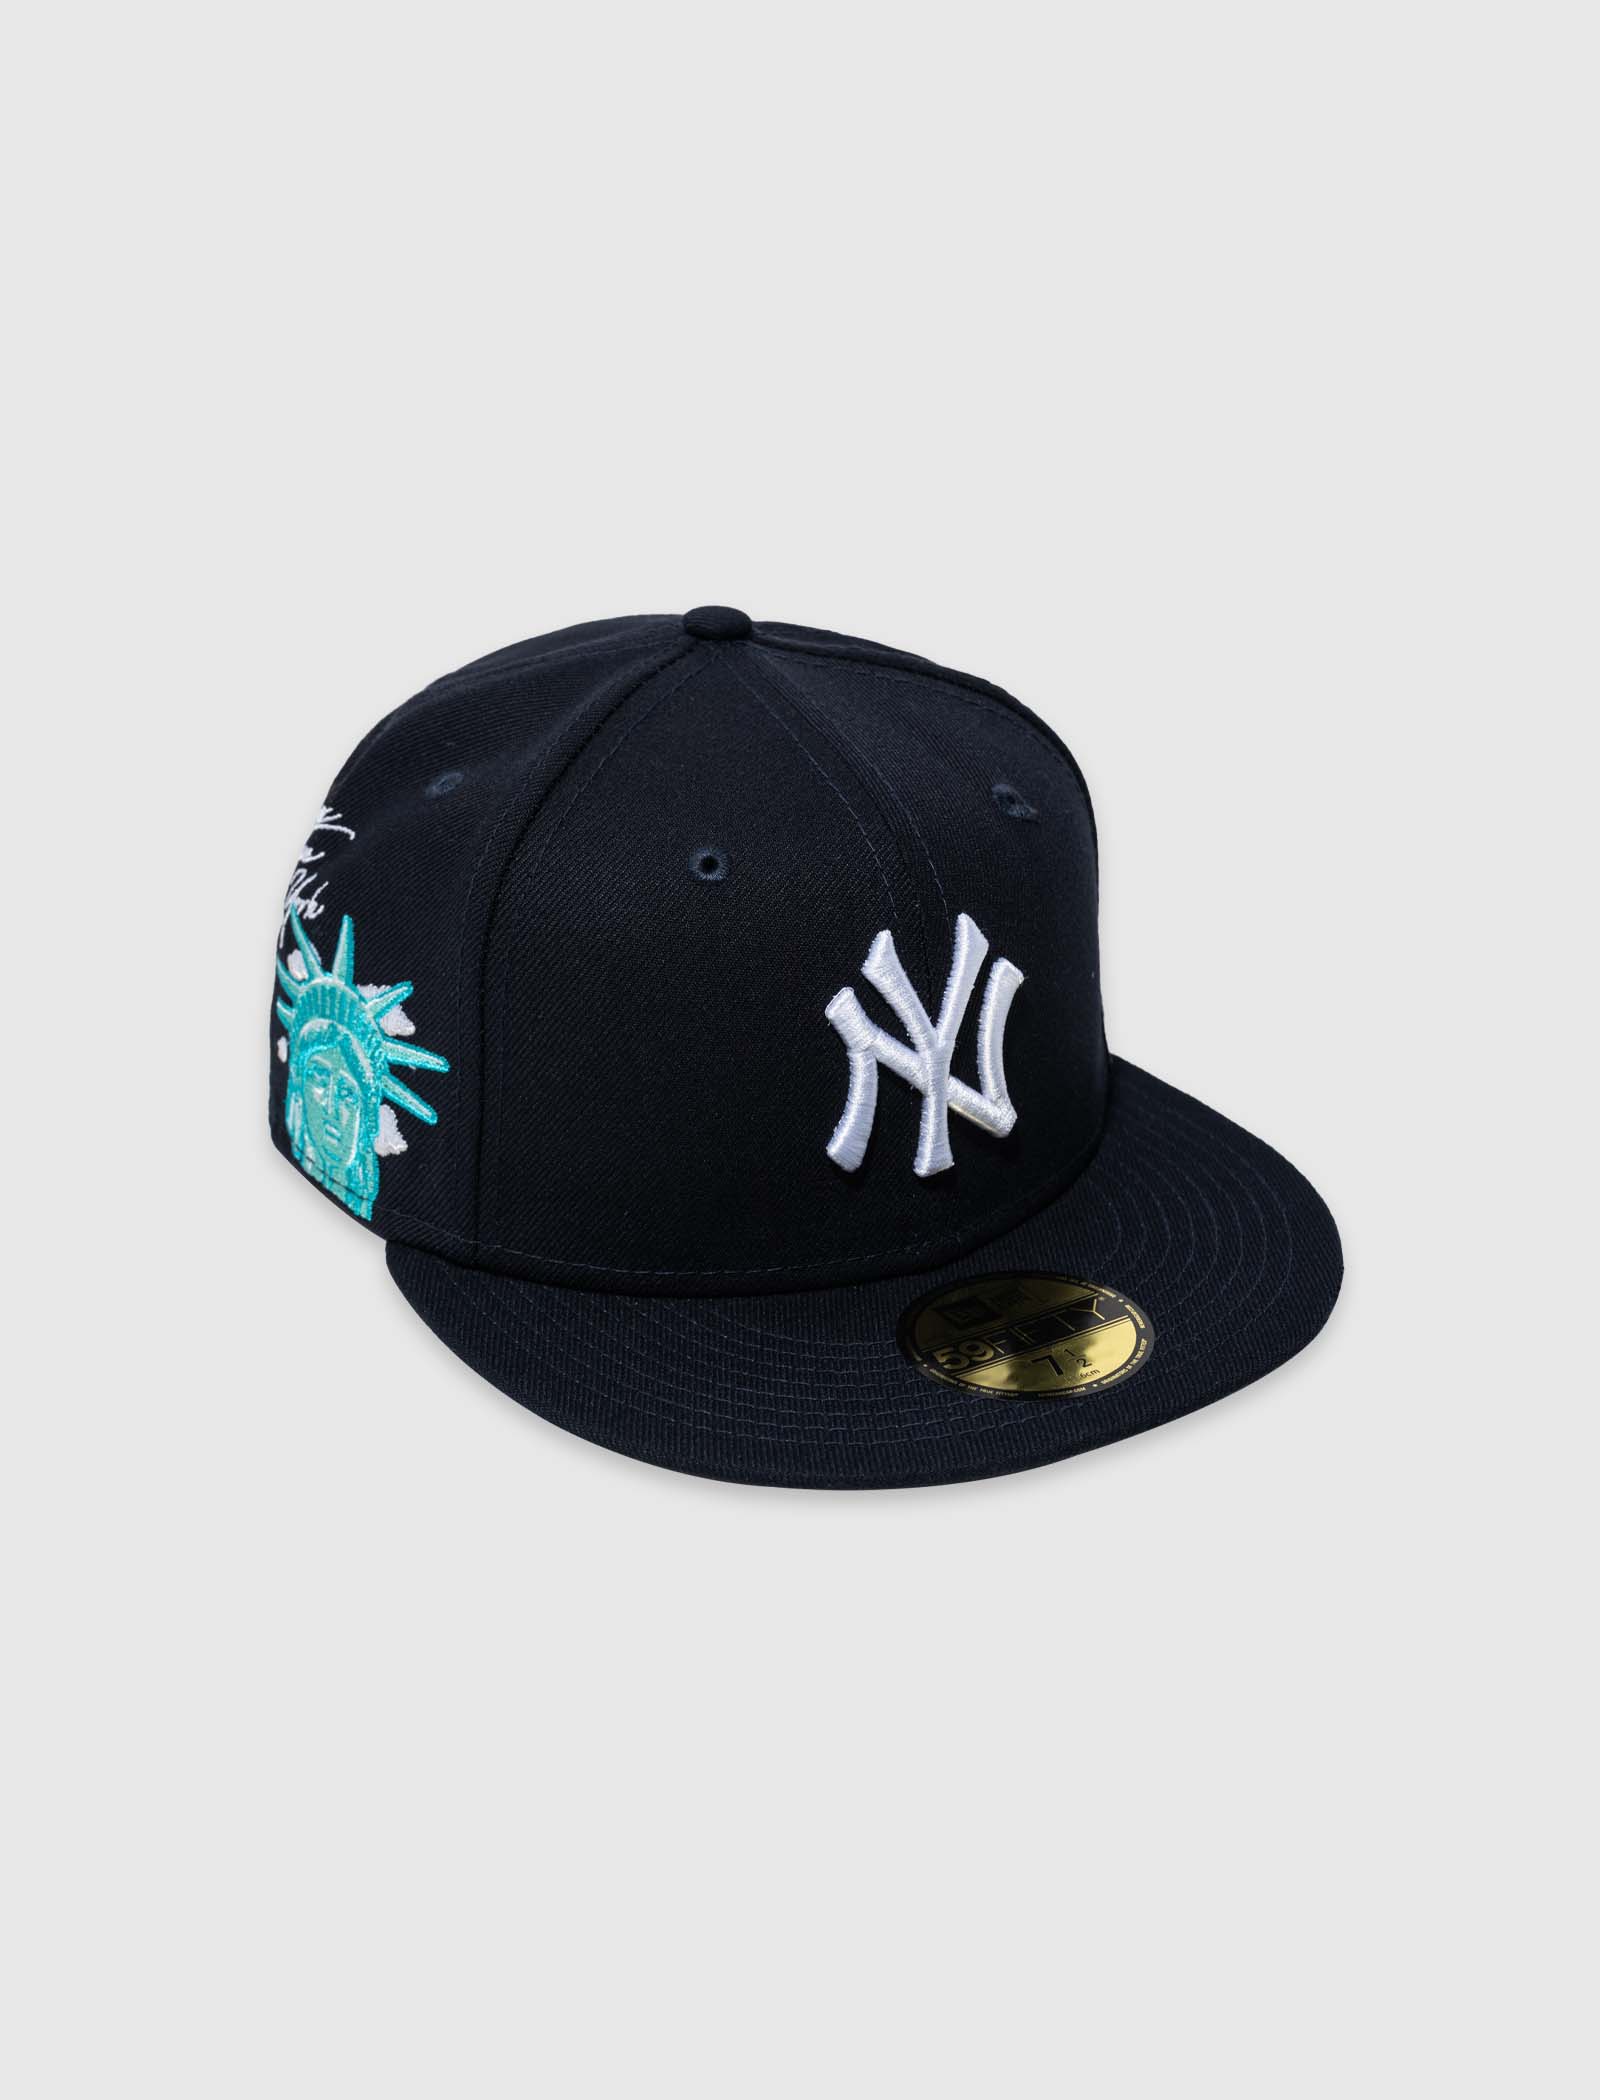 NY YANKEES CLOUD ICON 59FIFTY FITTED CAP